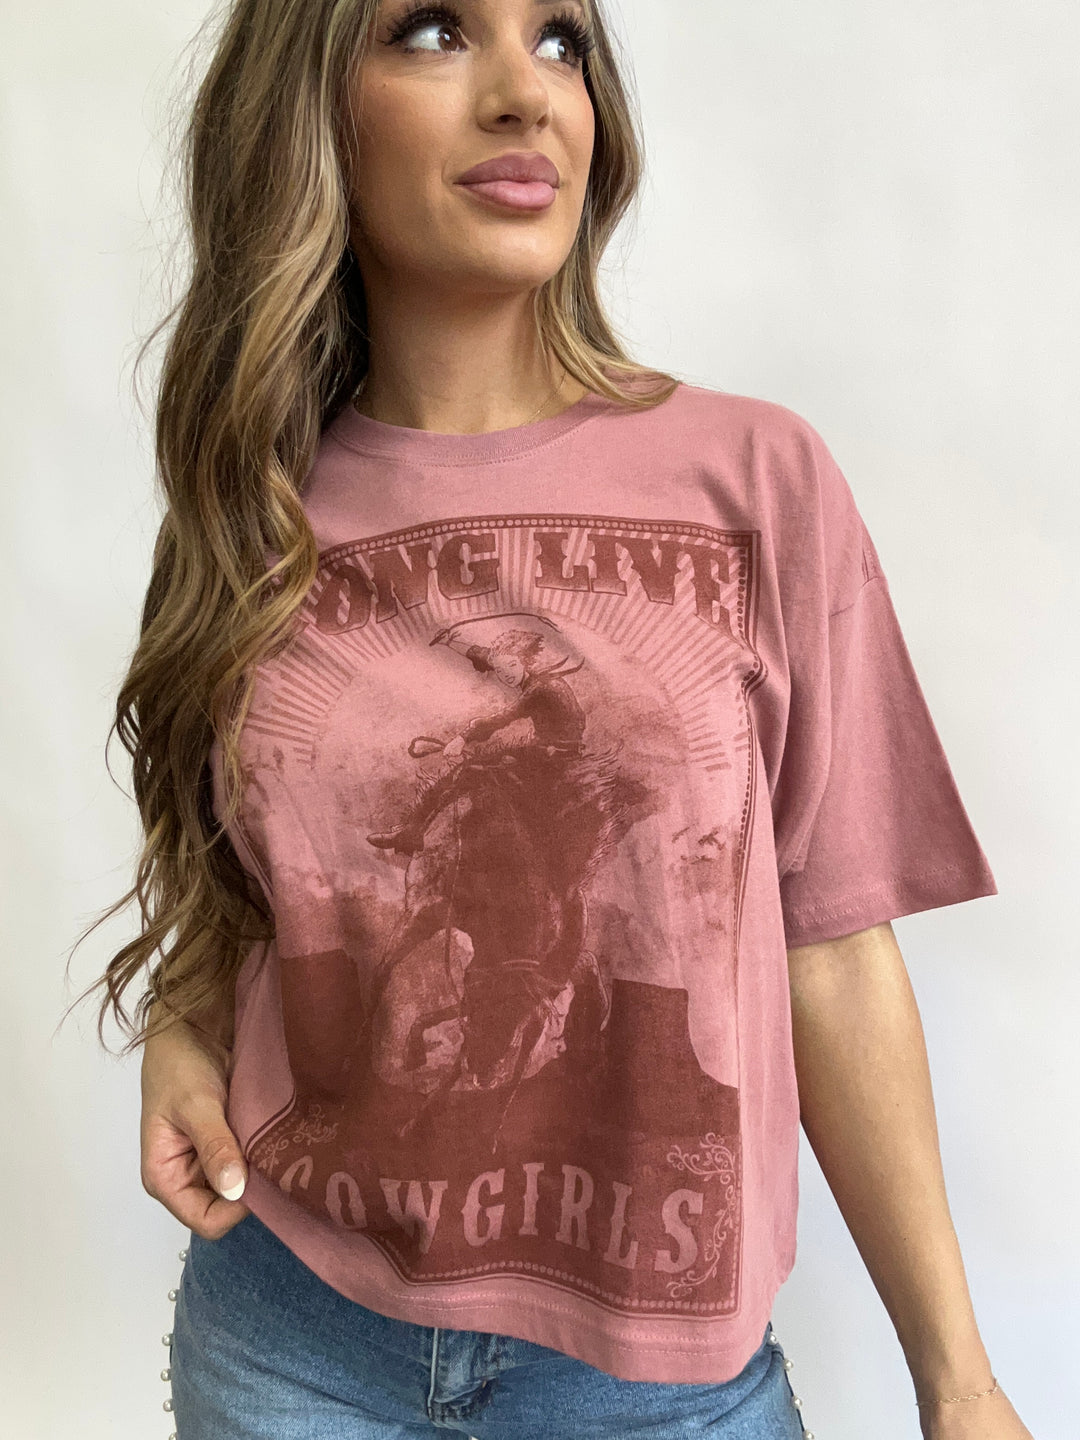 Long Live Cowgirls Graphic Crop Tee